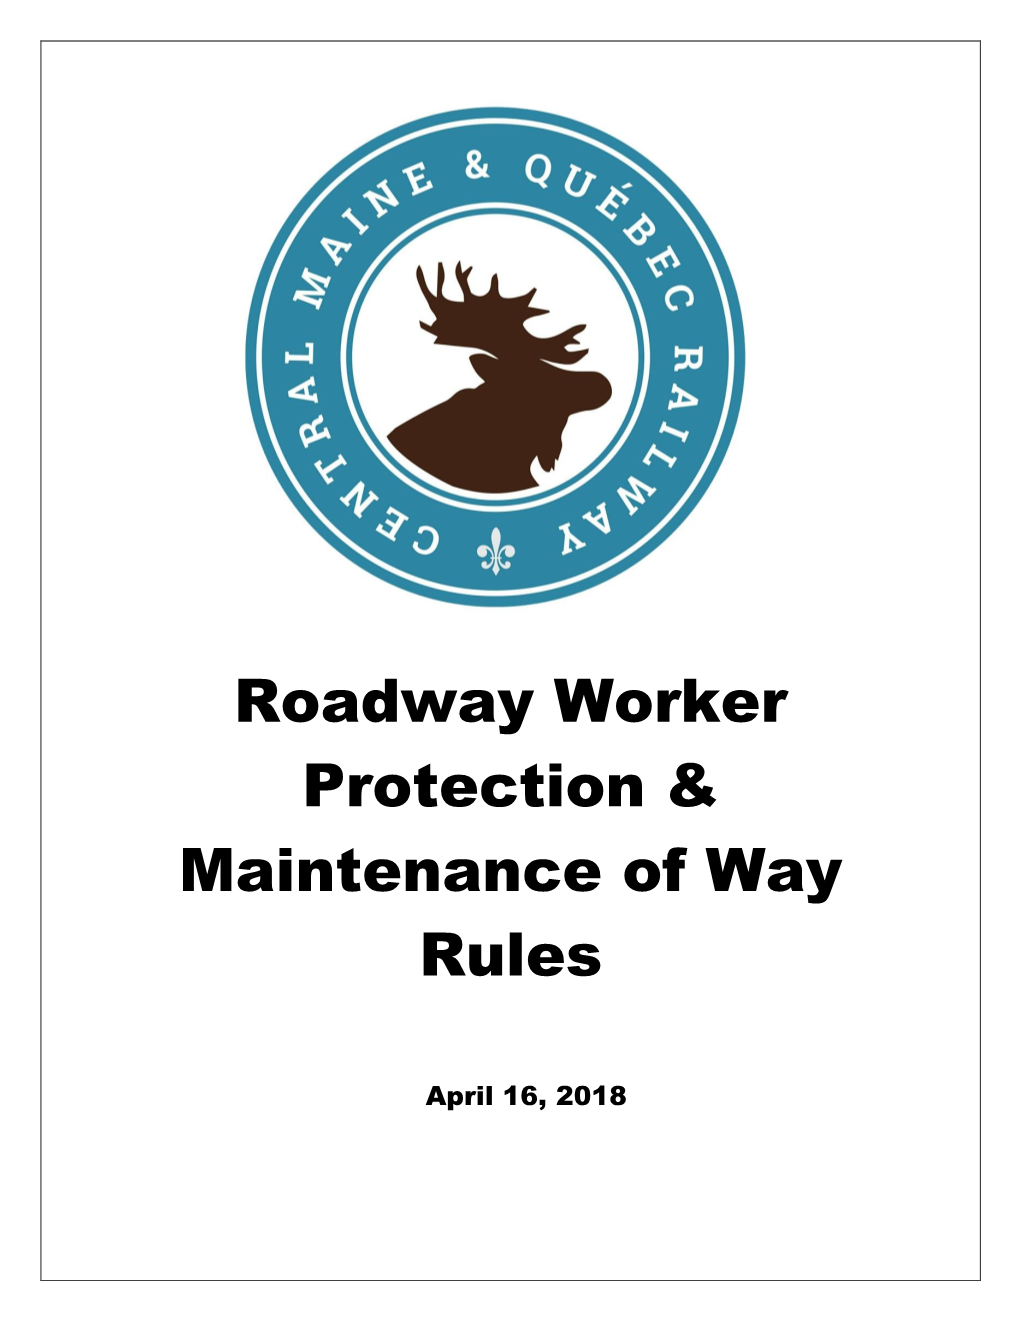 Roadway Worker Protection & Maintenance of Way Rules